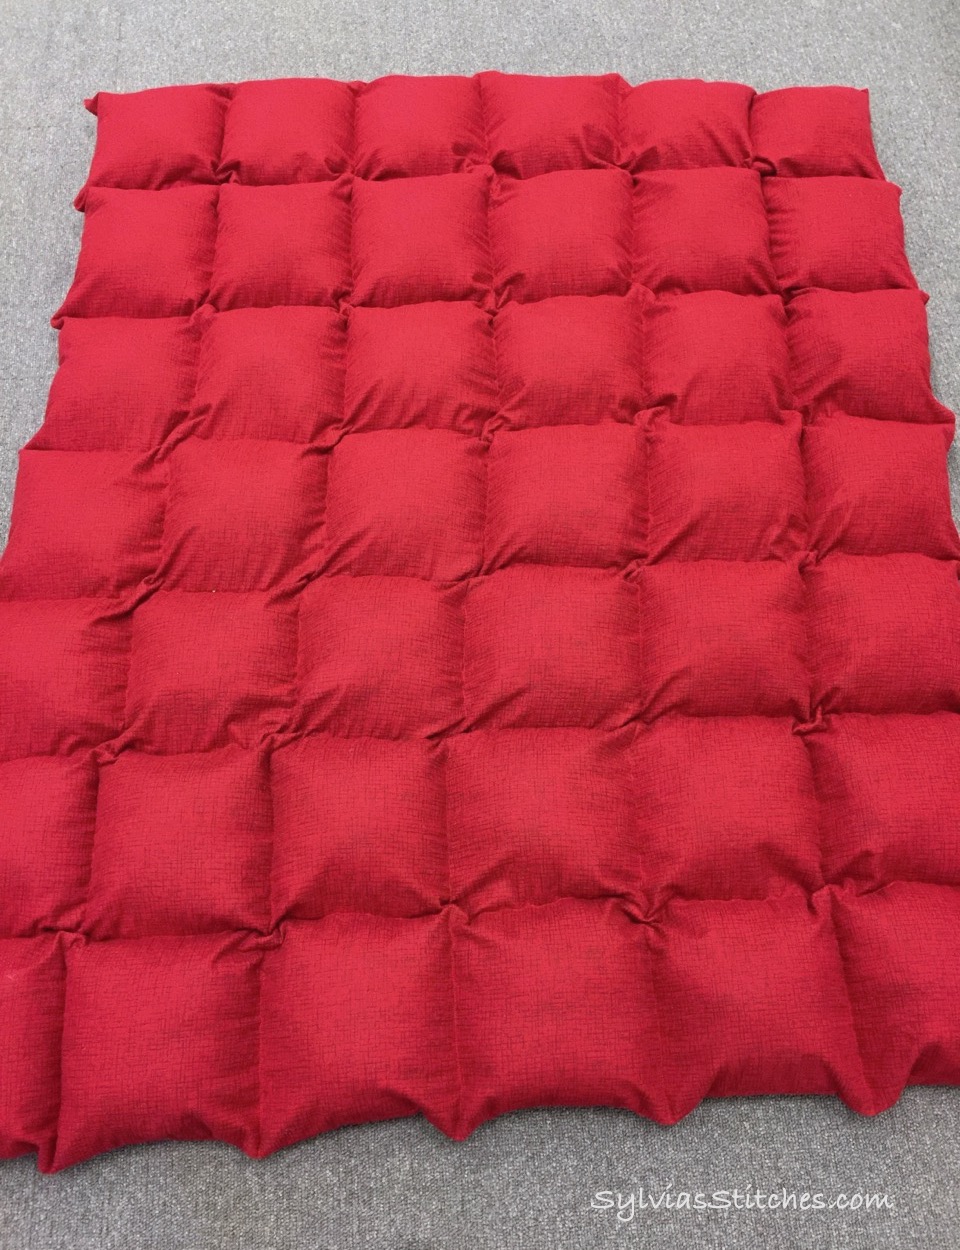 Weighted Blanket for Teen or Adult - Sylvia's Stitches